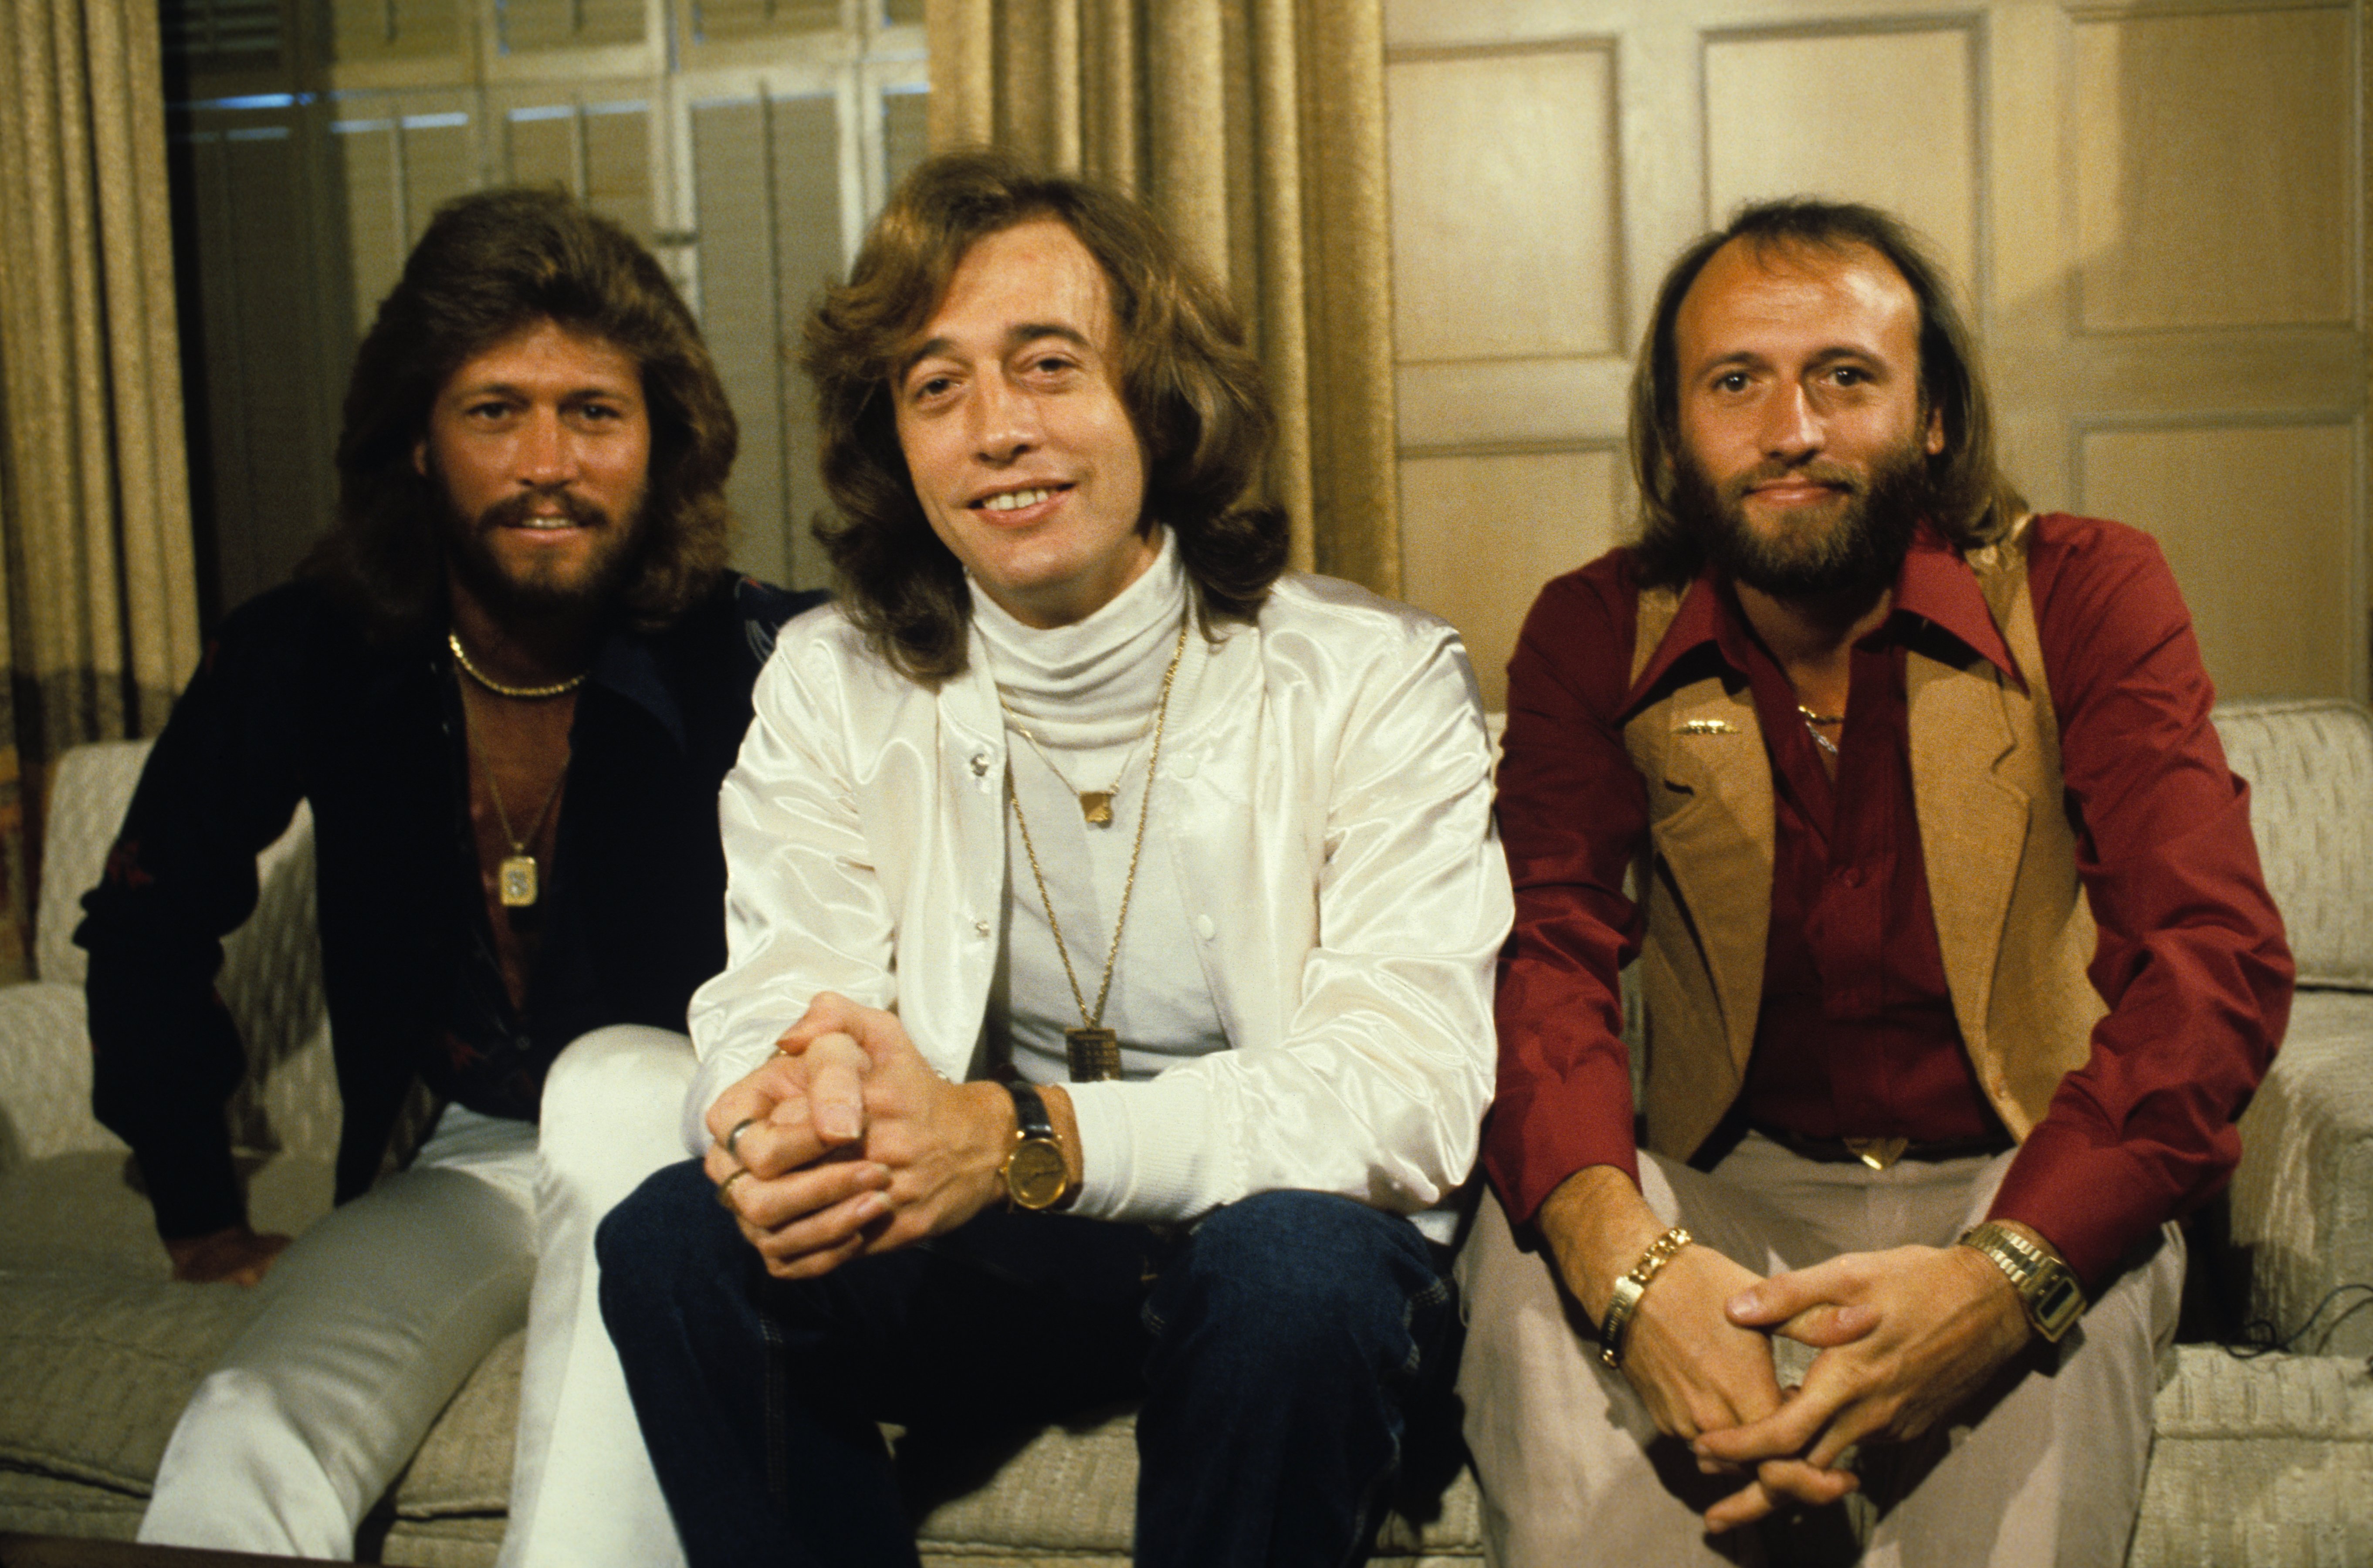 The popular disco band, The Bee Gees, pose for a portrait | Source: Getty Images